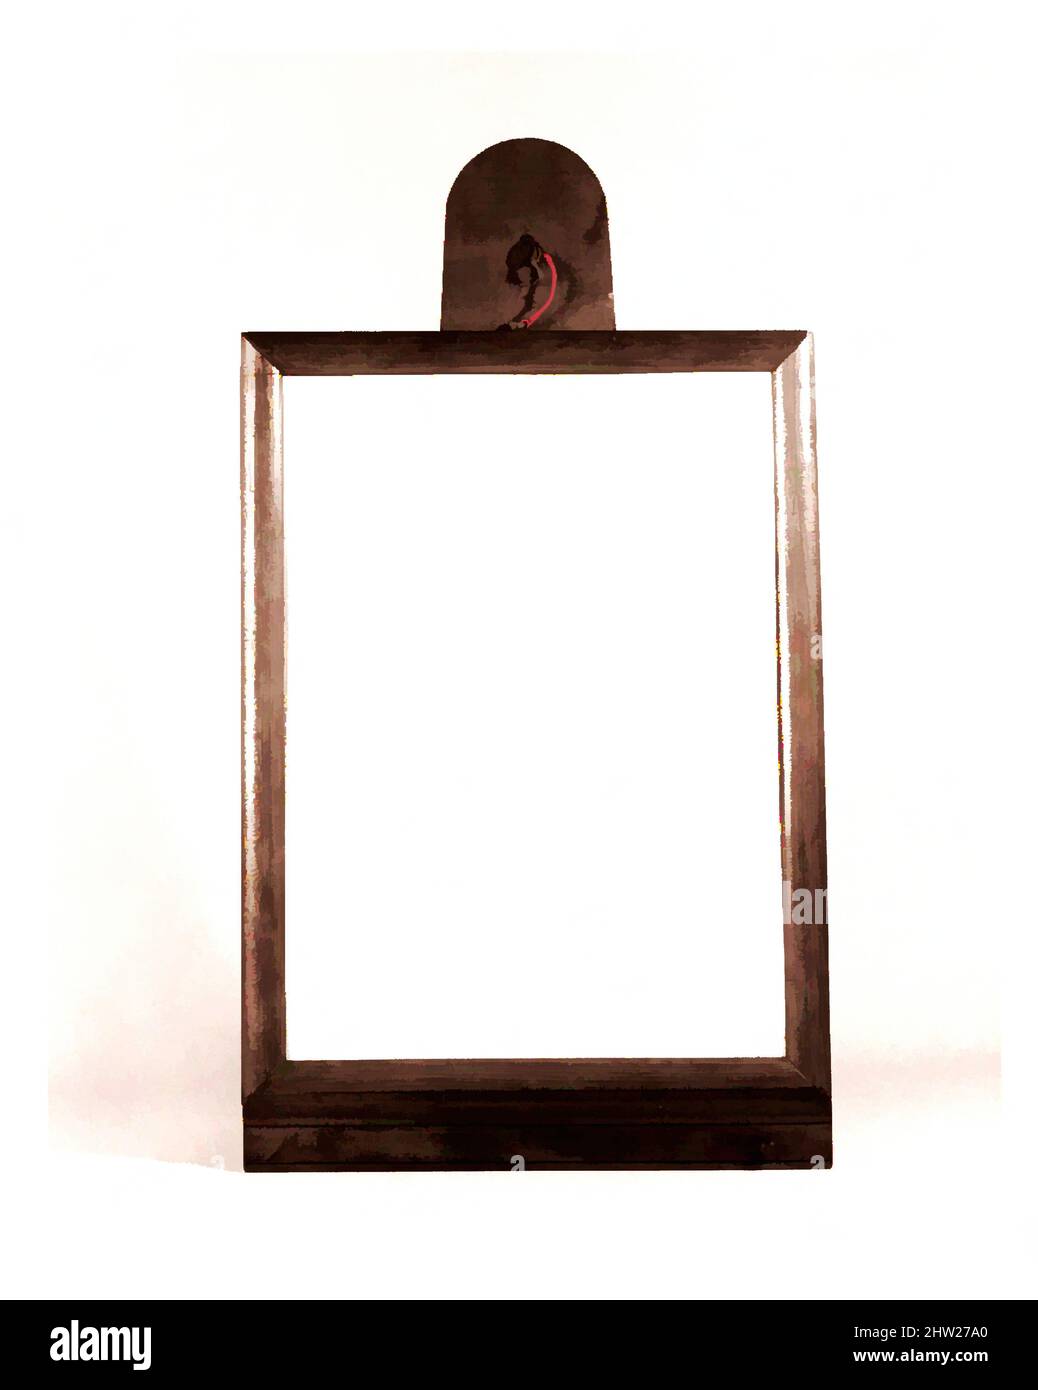 Art inspired by Looking Glass, 1840–60, American, Shaker, Cedar, maple, 24 5/16 x 13 1/2 in. (61.8 x 34.3 cm), Furniture, The earliest Shaker mirrors were made after 1821, when the religious laws allowing their use were written. This example with a convex-molded frame, and T-shape wall, Classic works modernized by Artotop with a splash of modernity. Shapes, color and value, eye-catching visual impact on art. Emotions through freedom of artworks in a contemporary way. A timeless message pursuing a wildly creative new direction. Artists turning to the digital medium and creating the Artotop NFT Stock Photo